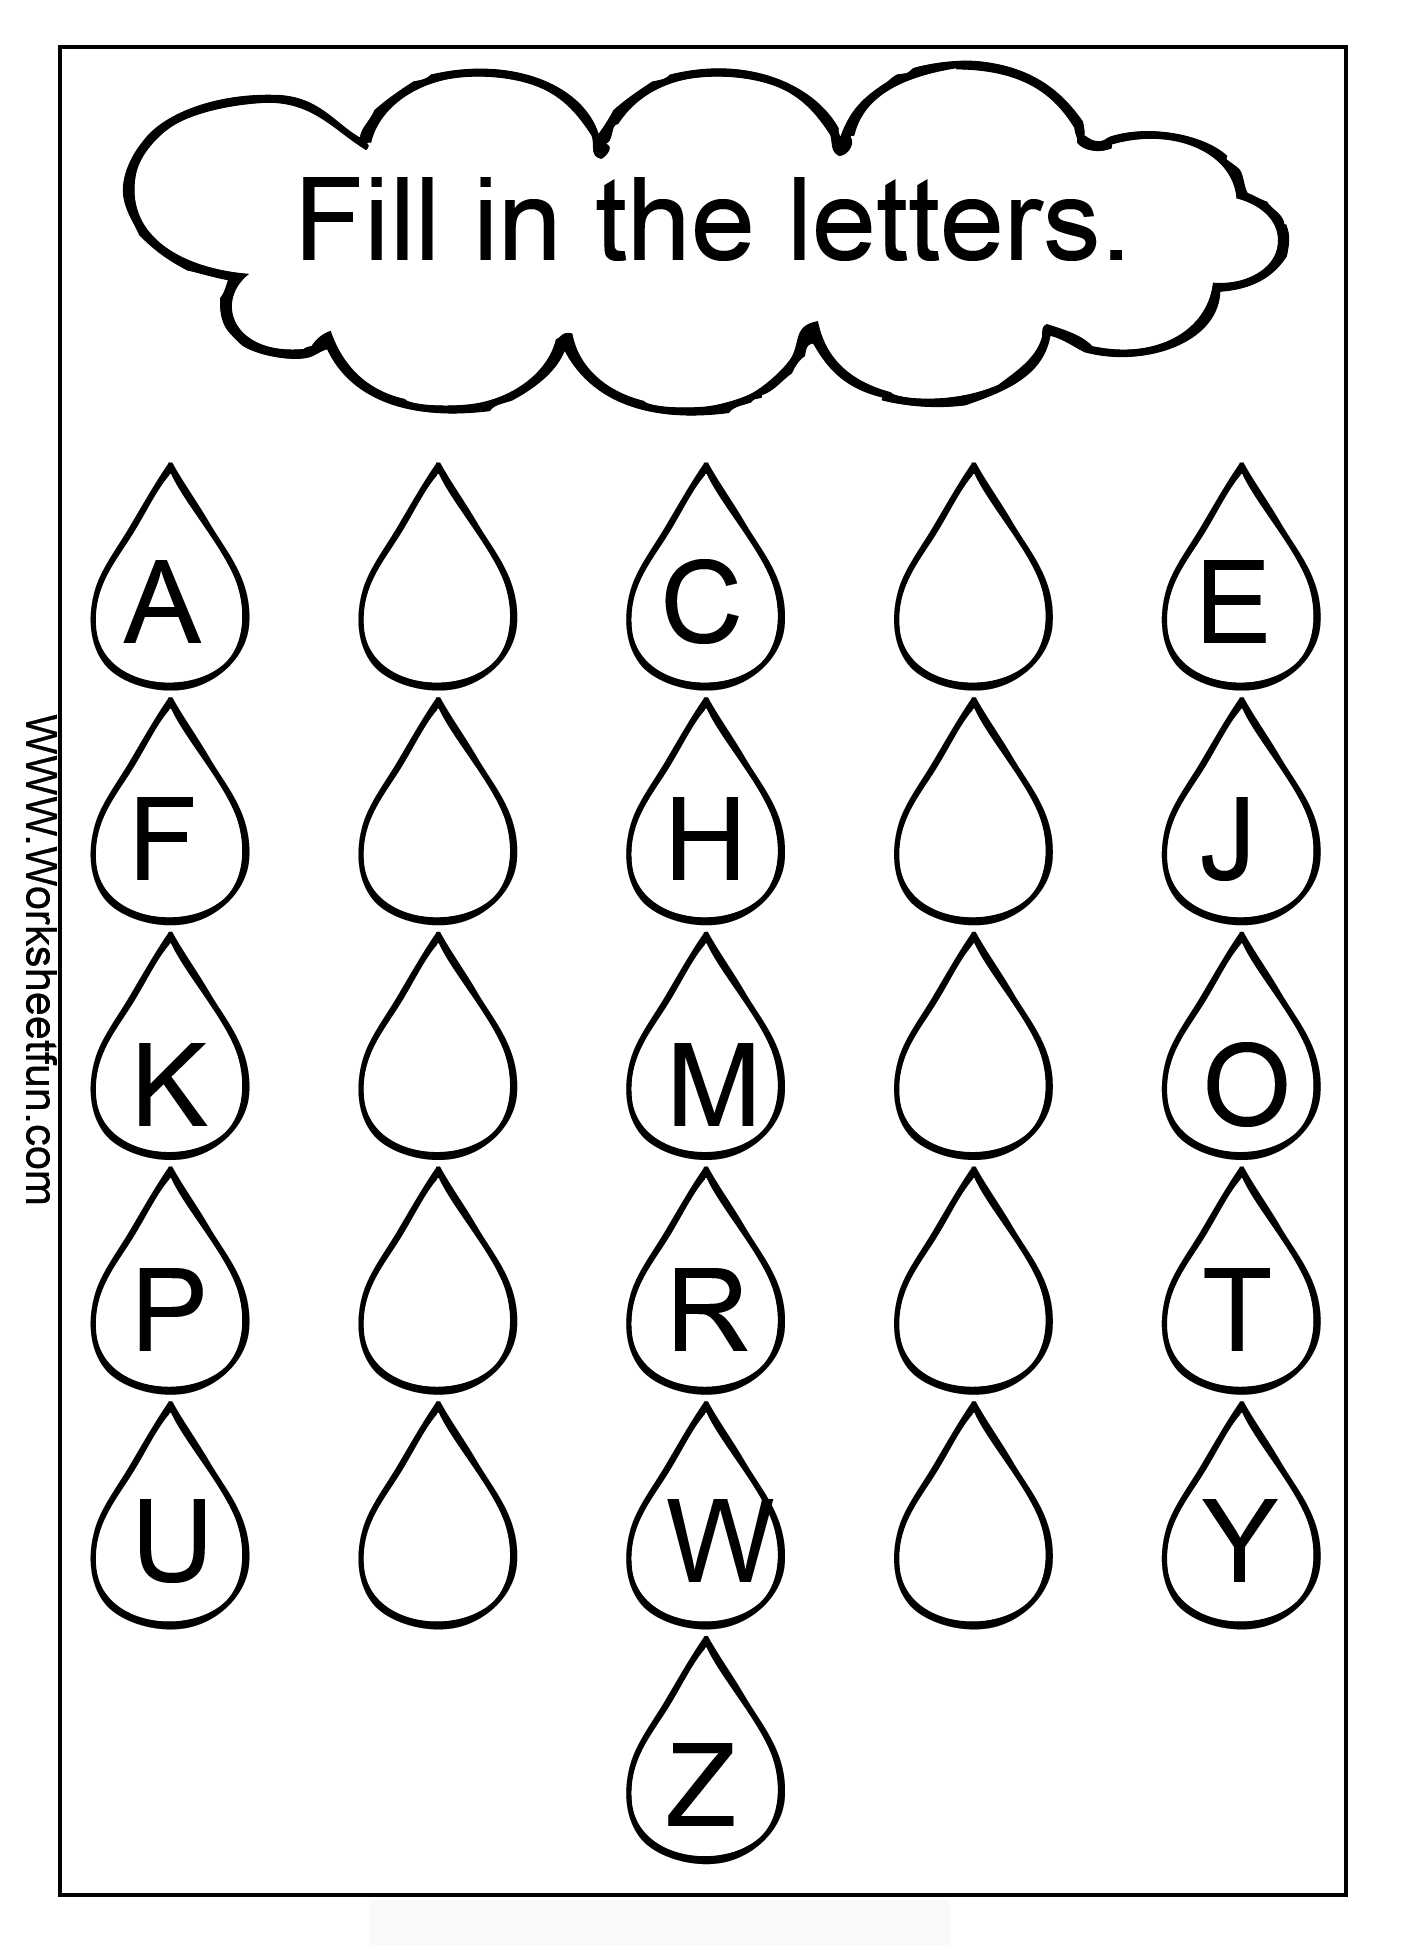 Spanish Alphabet Worksheets Also 9 Of Alphabet Missing Letter Worksheet and tons Of Other